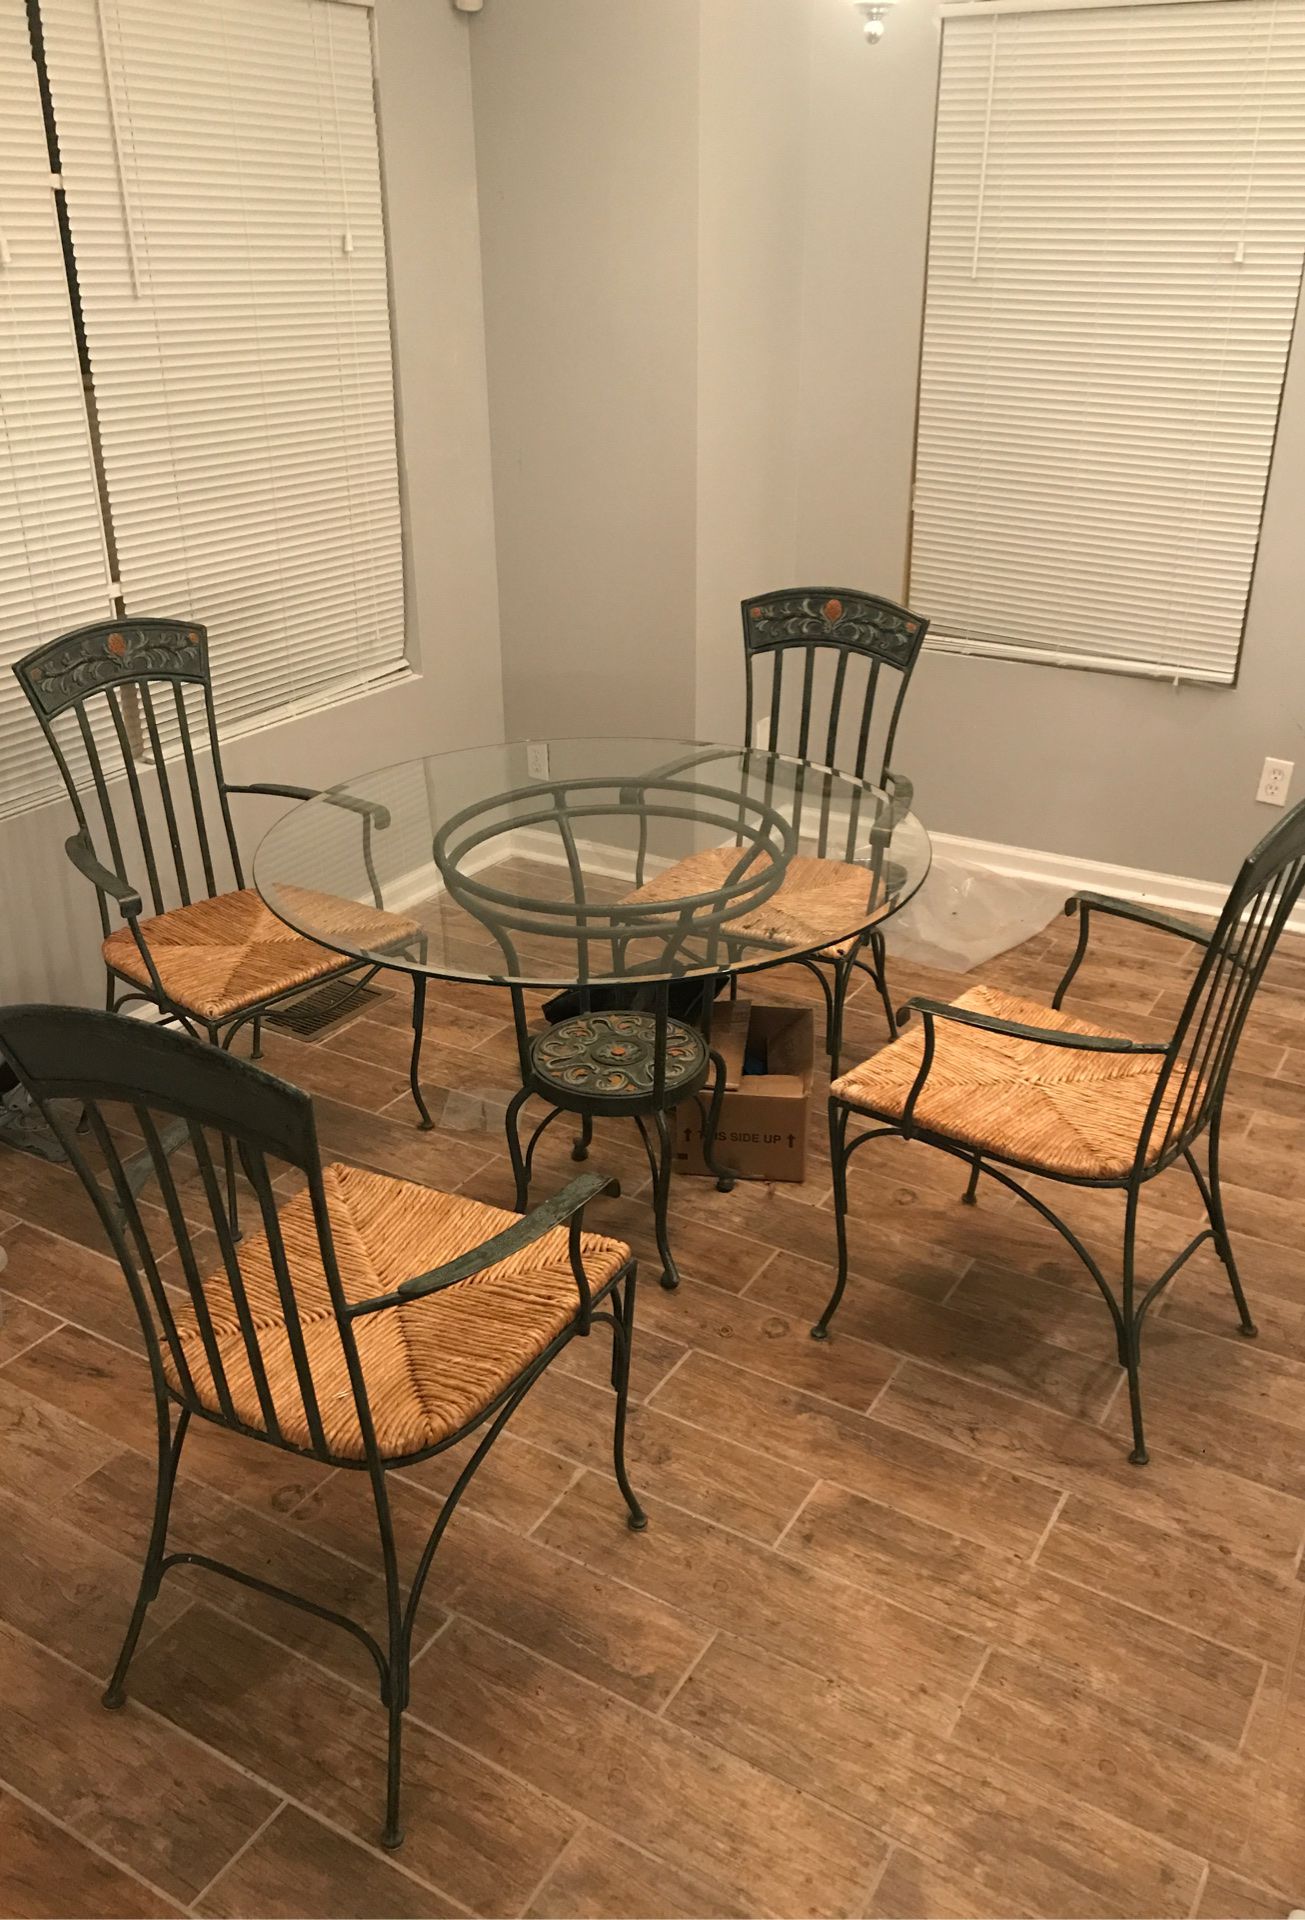 Dining set with glass tabletop, base, and four chairs | $200 OBO